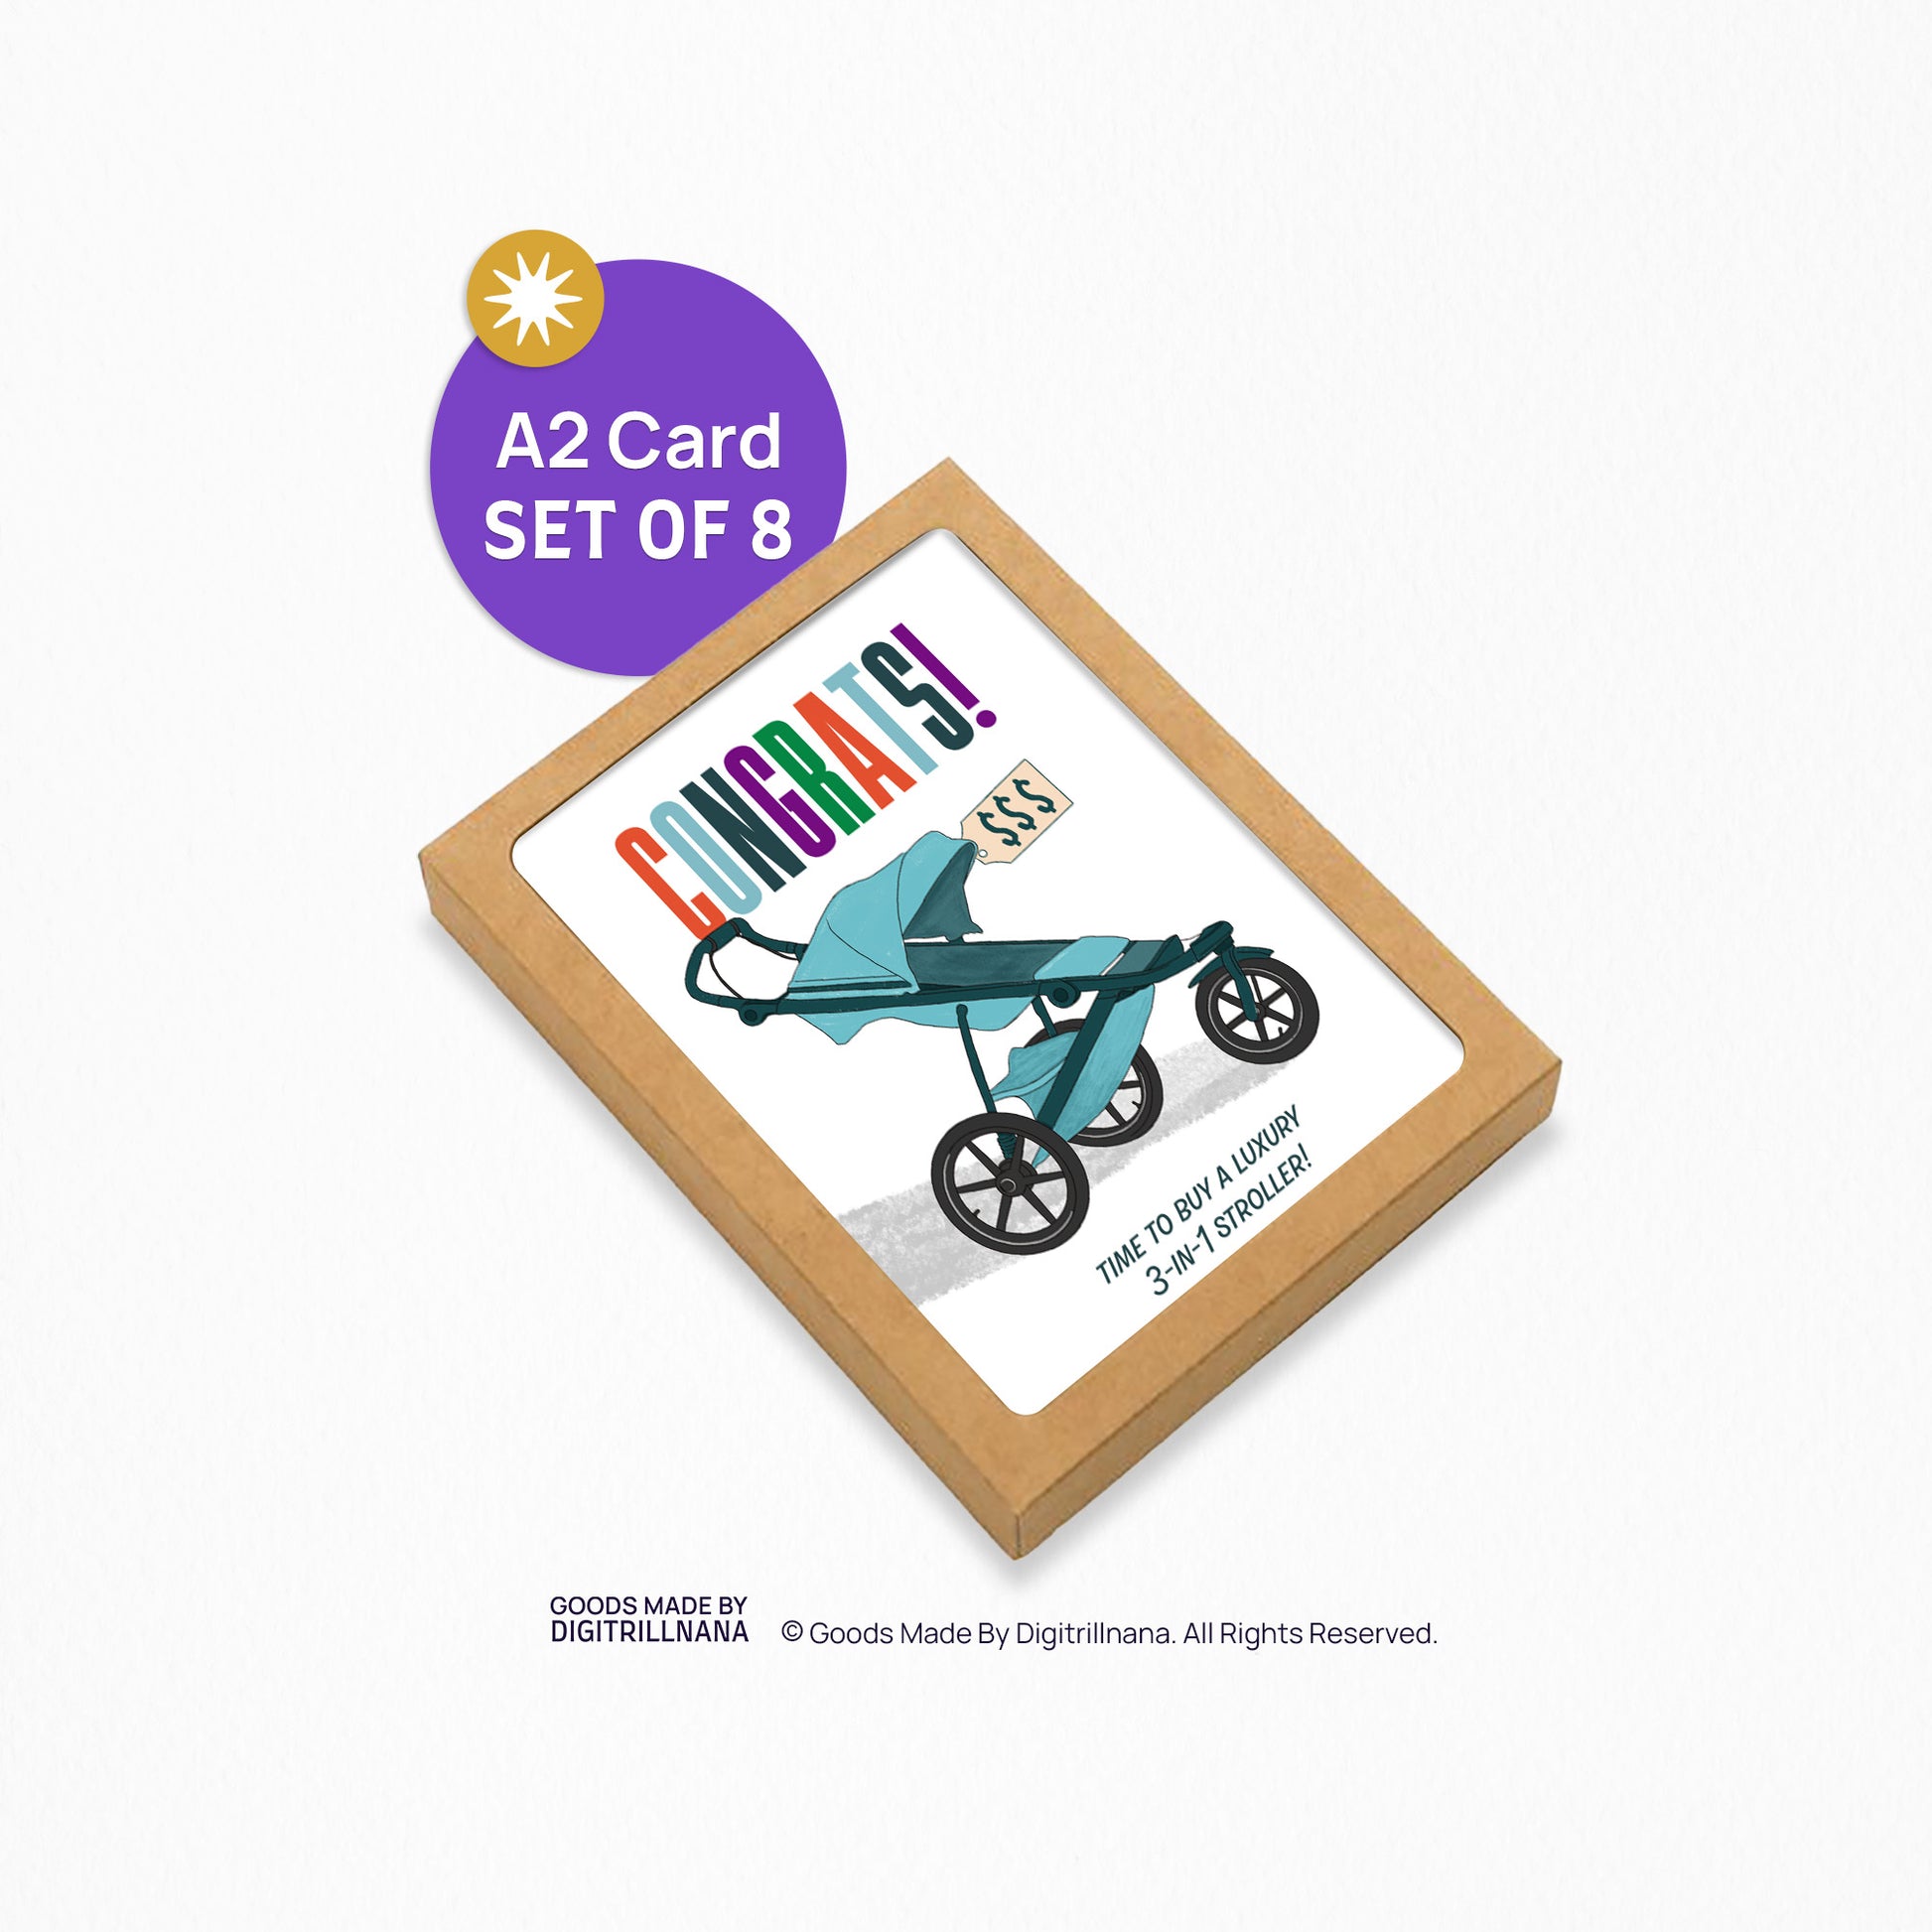 "4.25 x 5.5” A2 sized card with an illustration of a blue luxury modern stroller. The illustrated baby carriage is the perfect card for expecting parents. The text on the card reads ‘Congrats’ in various colors. The inside of the card is blank. Envelope included. "